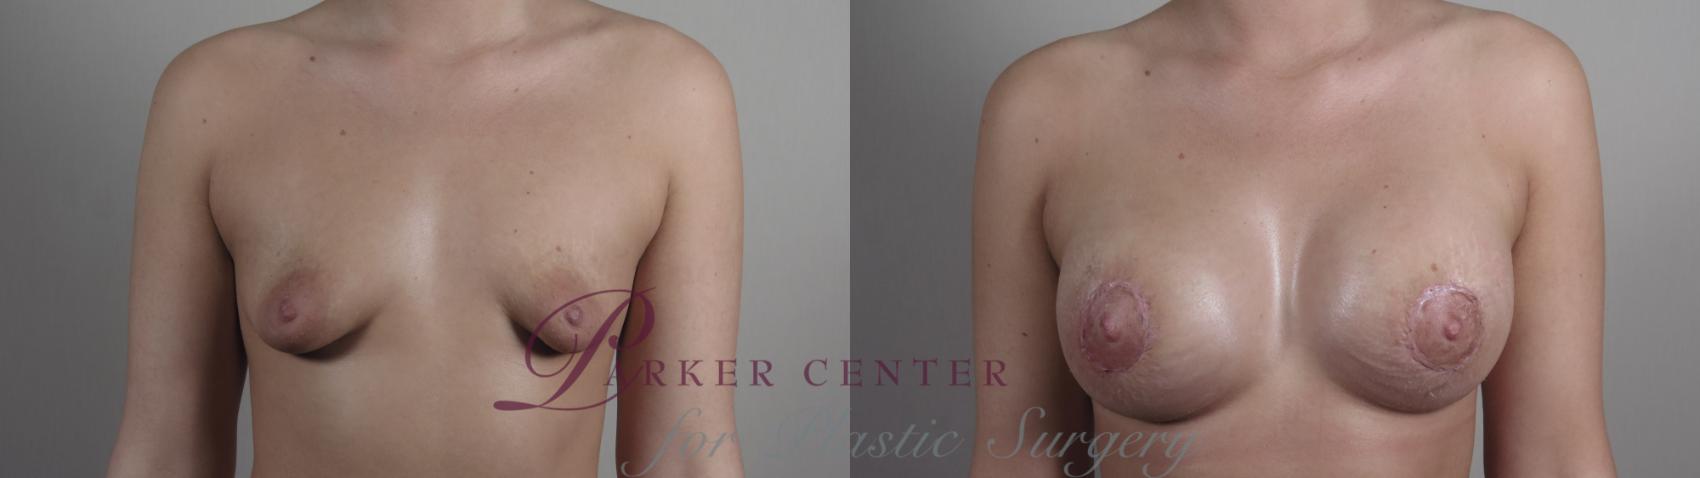 Breast Lift with Implants Case 972 Before & After Front | Paramus, NJ | Parker Center for Plastic Surgery